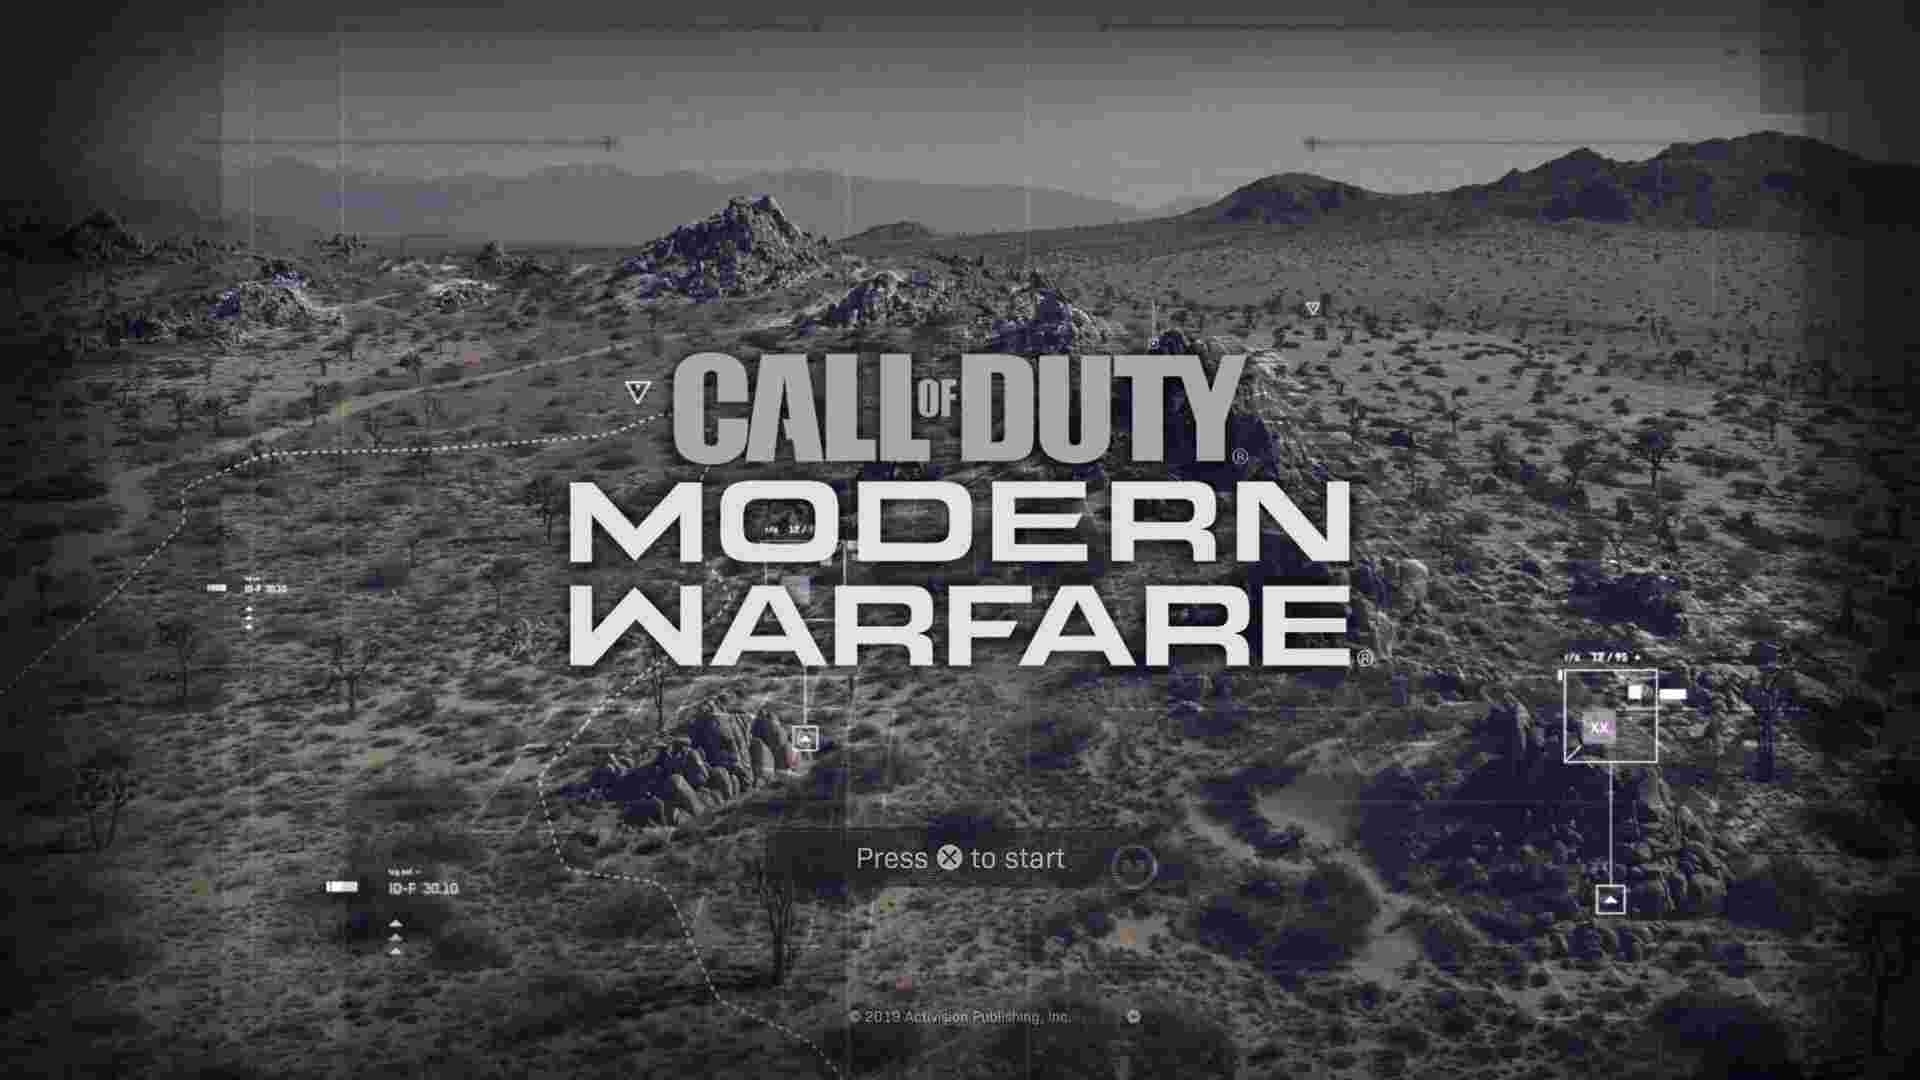 Call of Duty Modern Warfare Season 1 details, new maps, weapons, special ops, game modes, & more